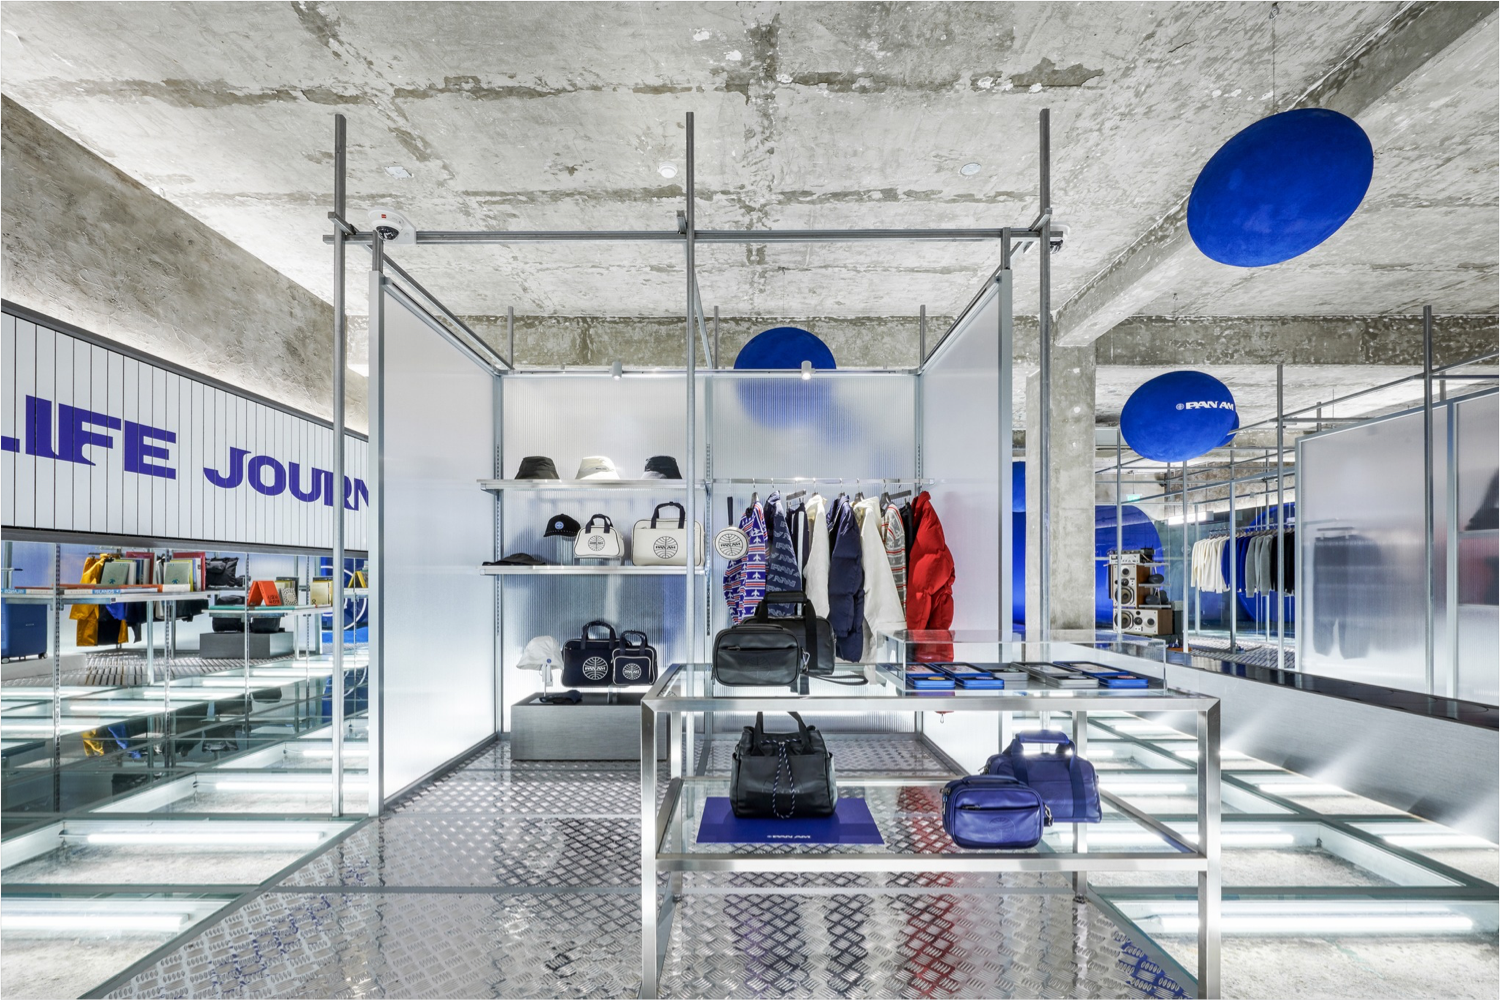 PAN AM's lifestyle brand opens a new flagship store in an old